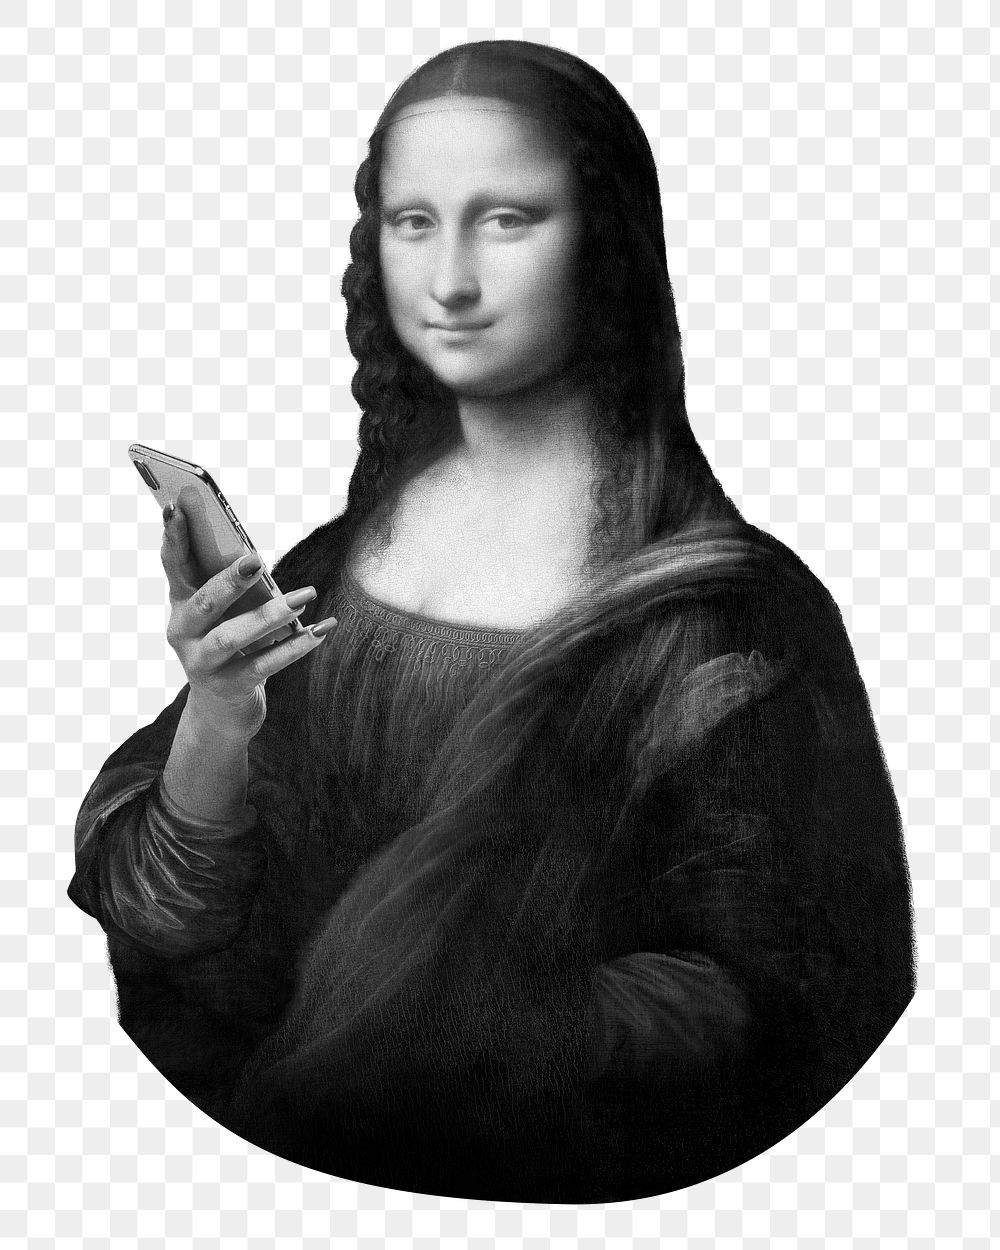 Mona Lisa using smartphone png sticker, black and white cut out on transparent background, famous artwork remixed by rawpixel